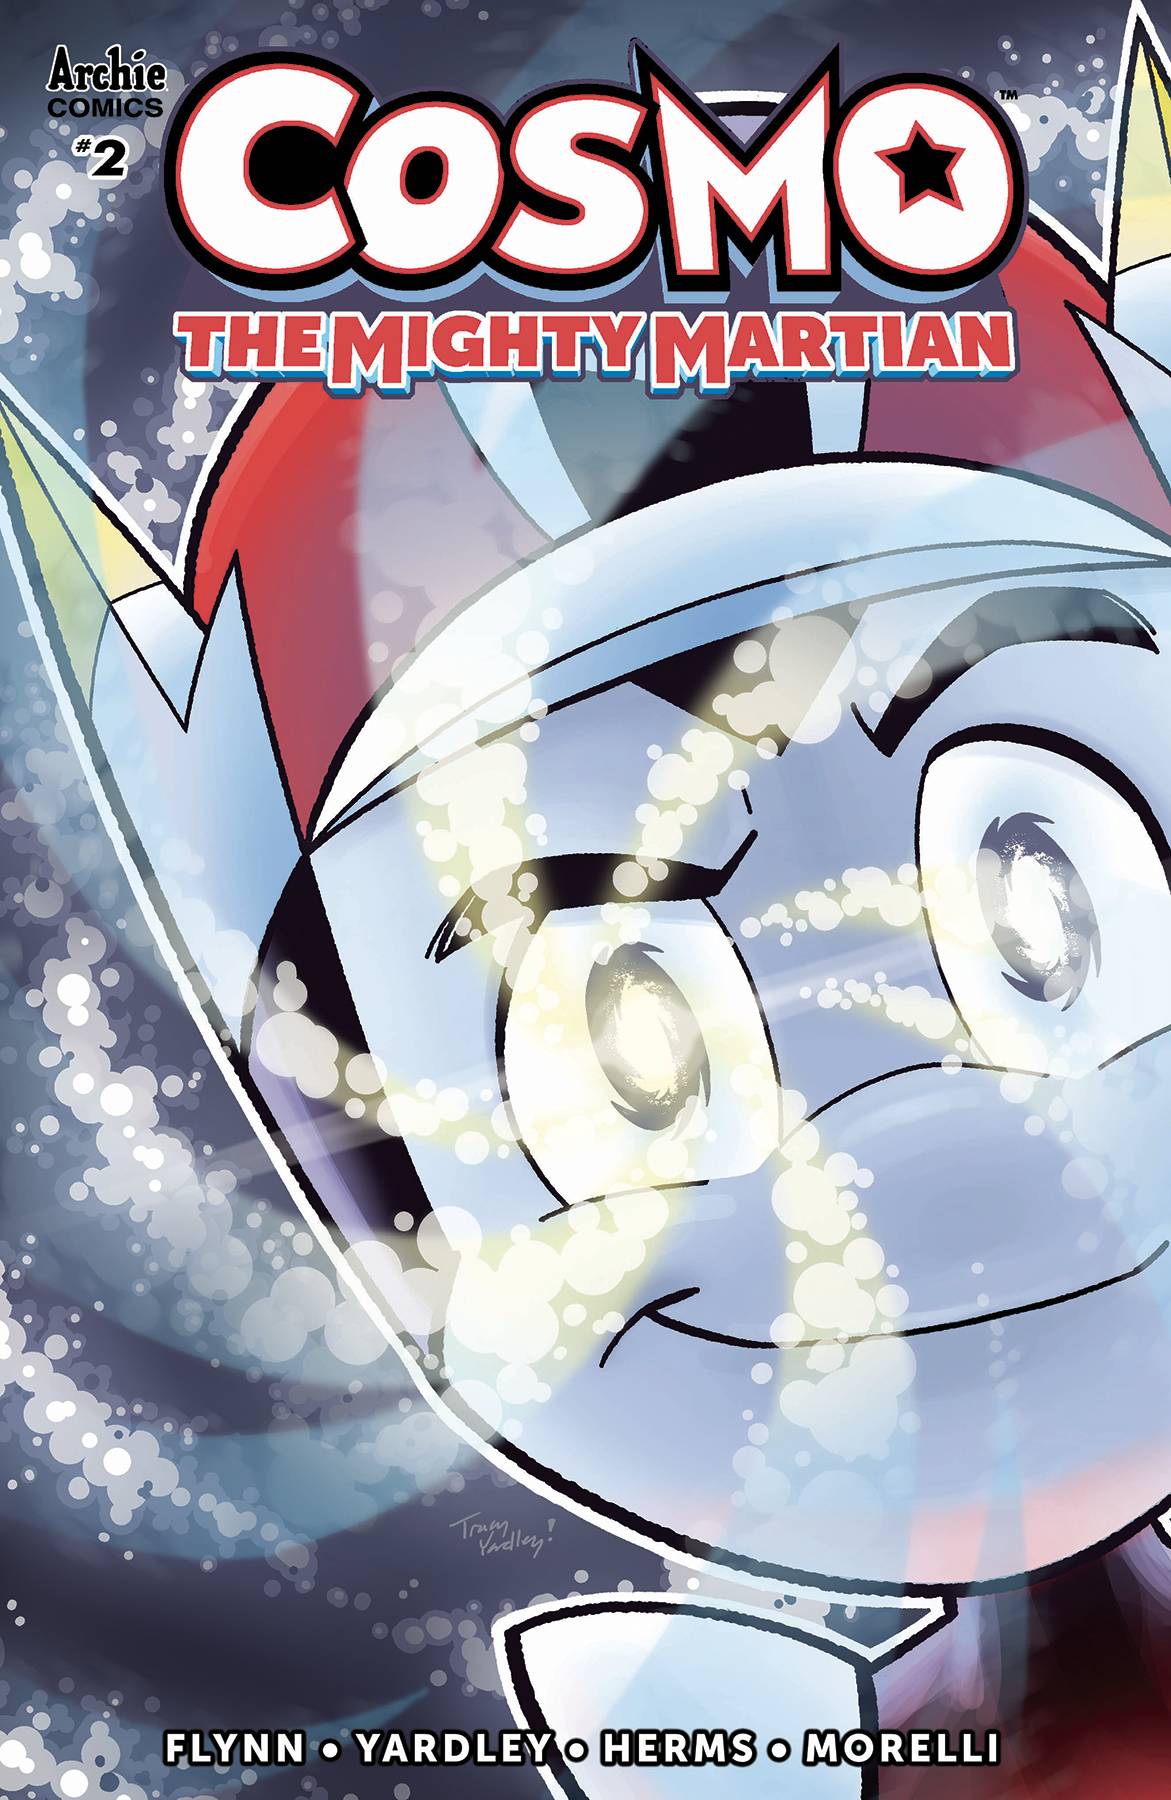 Cosmo: The Mighty Martian #2 (2019)